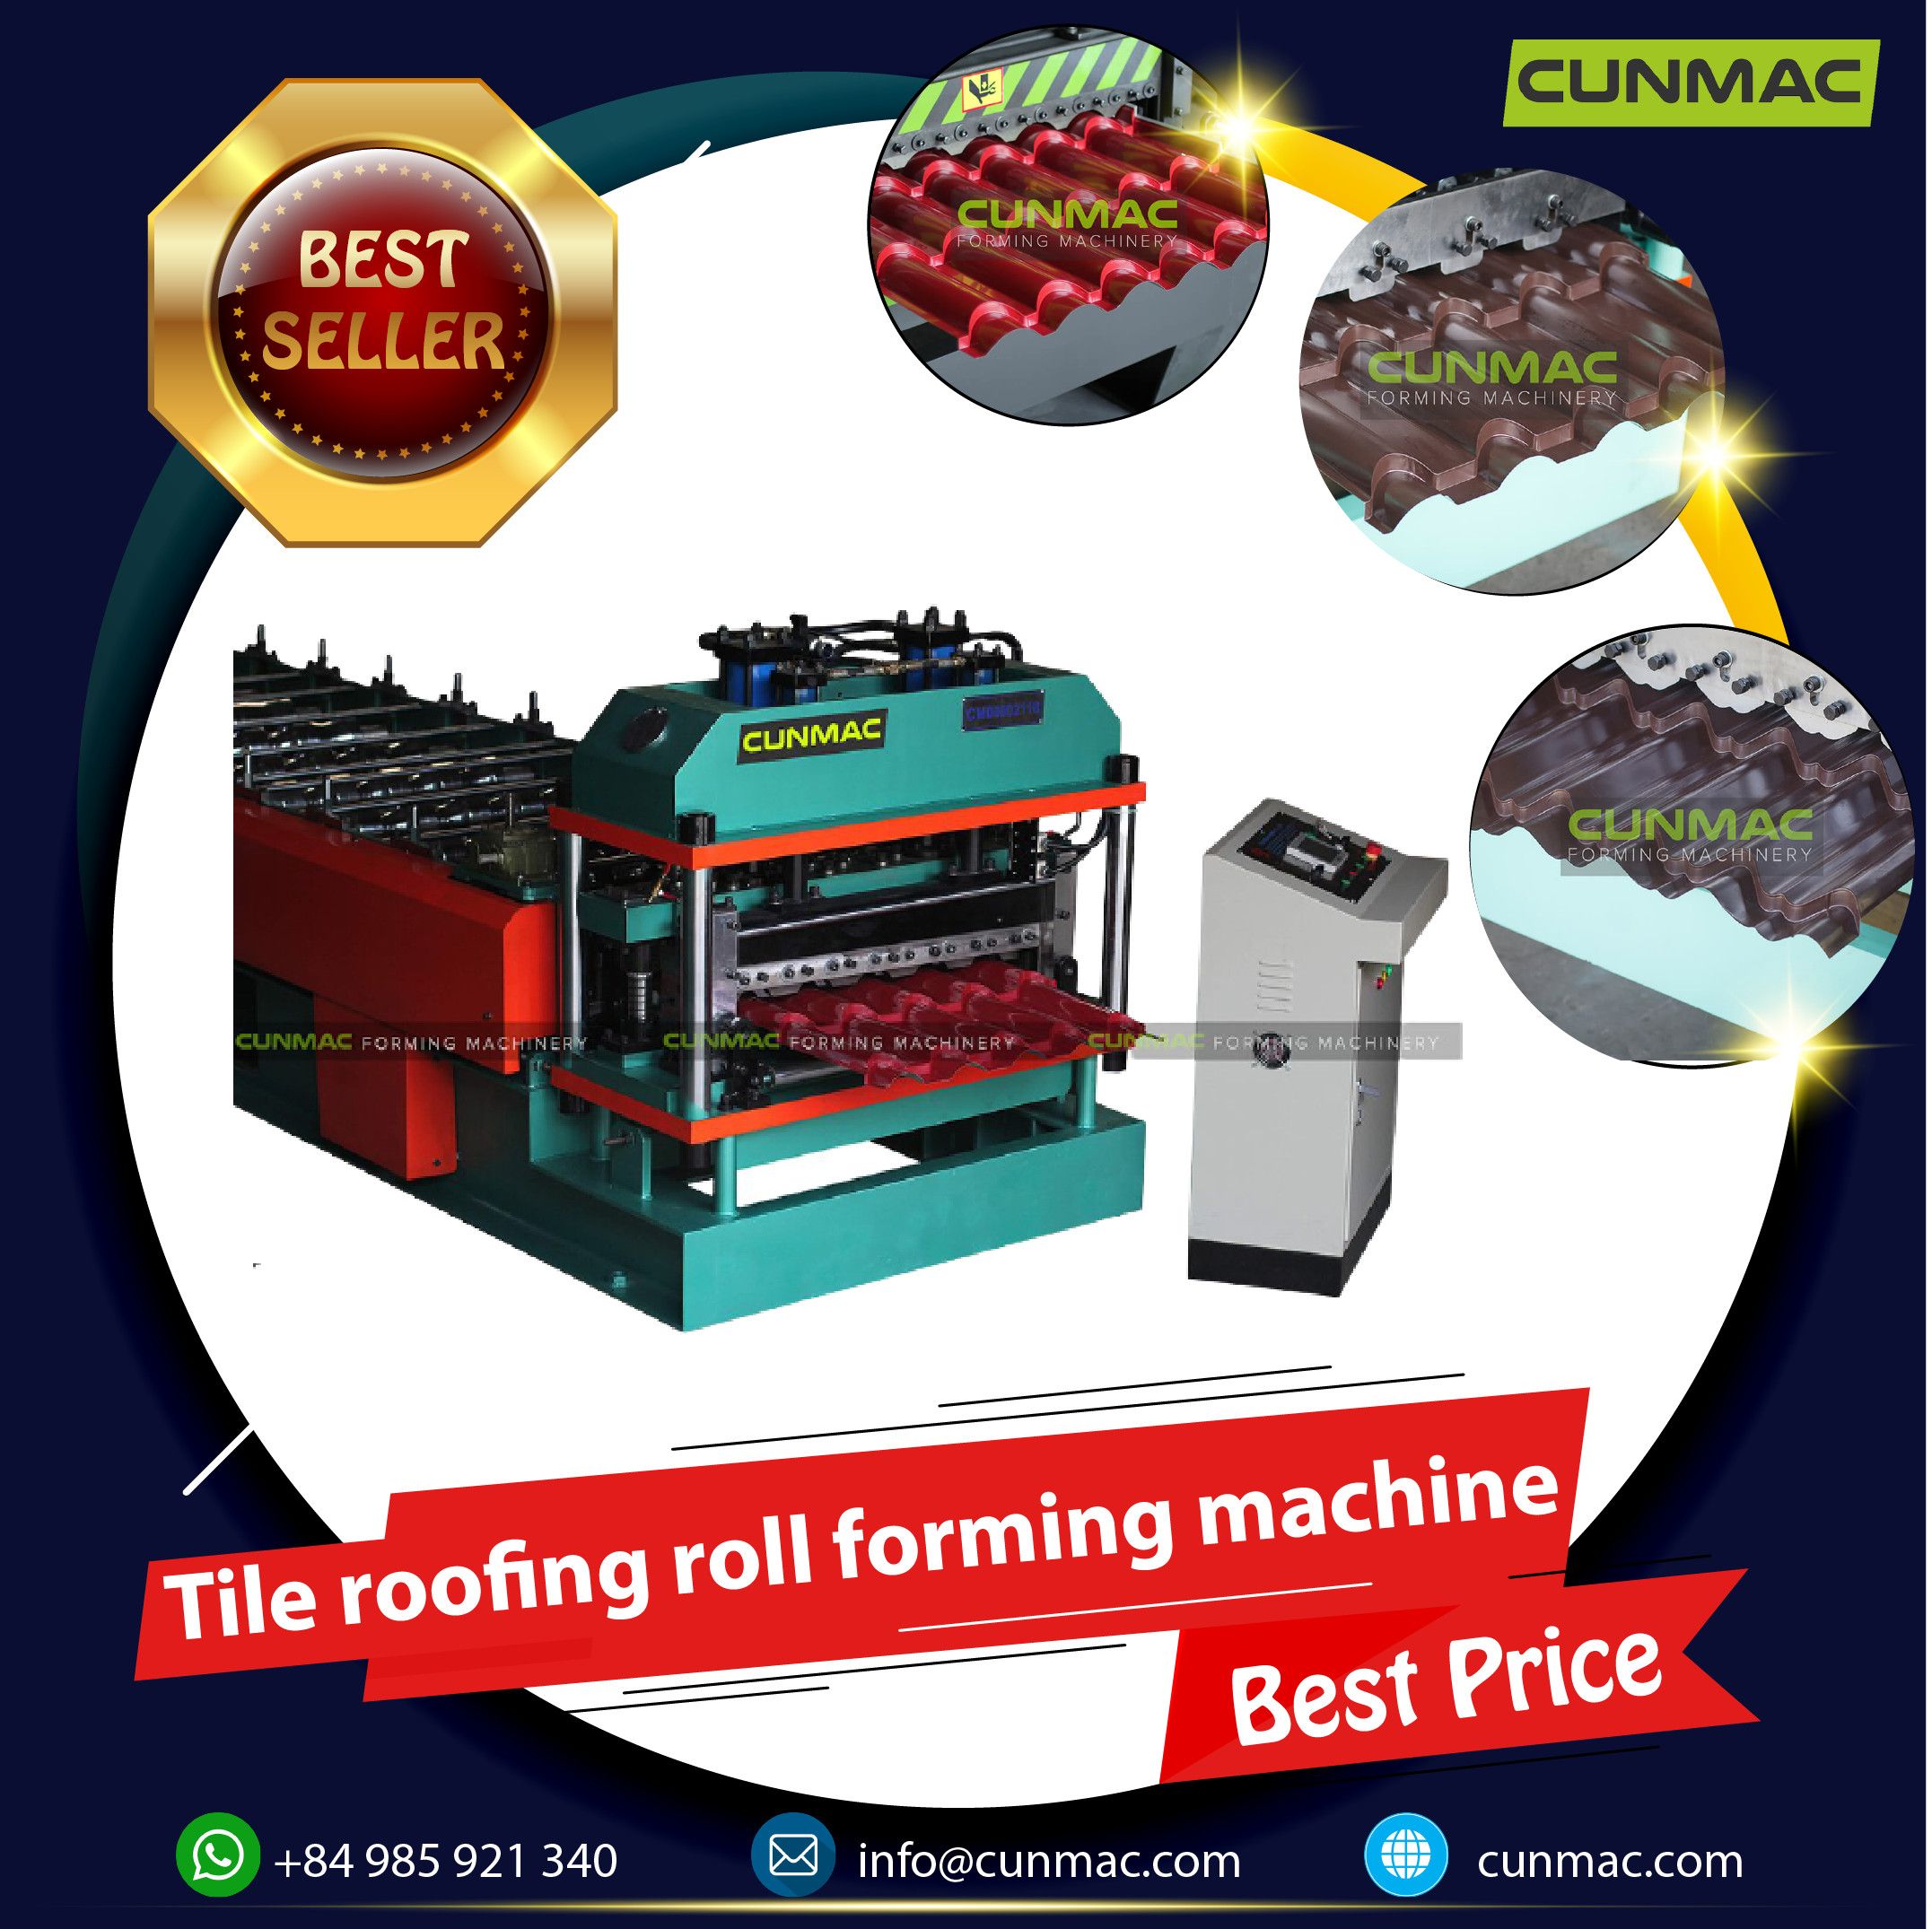 Tile roofing roll forming machine